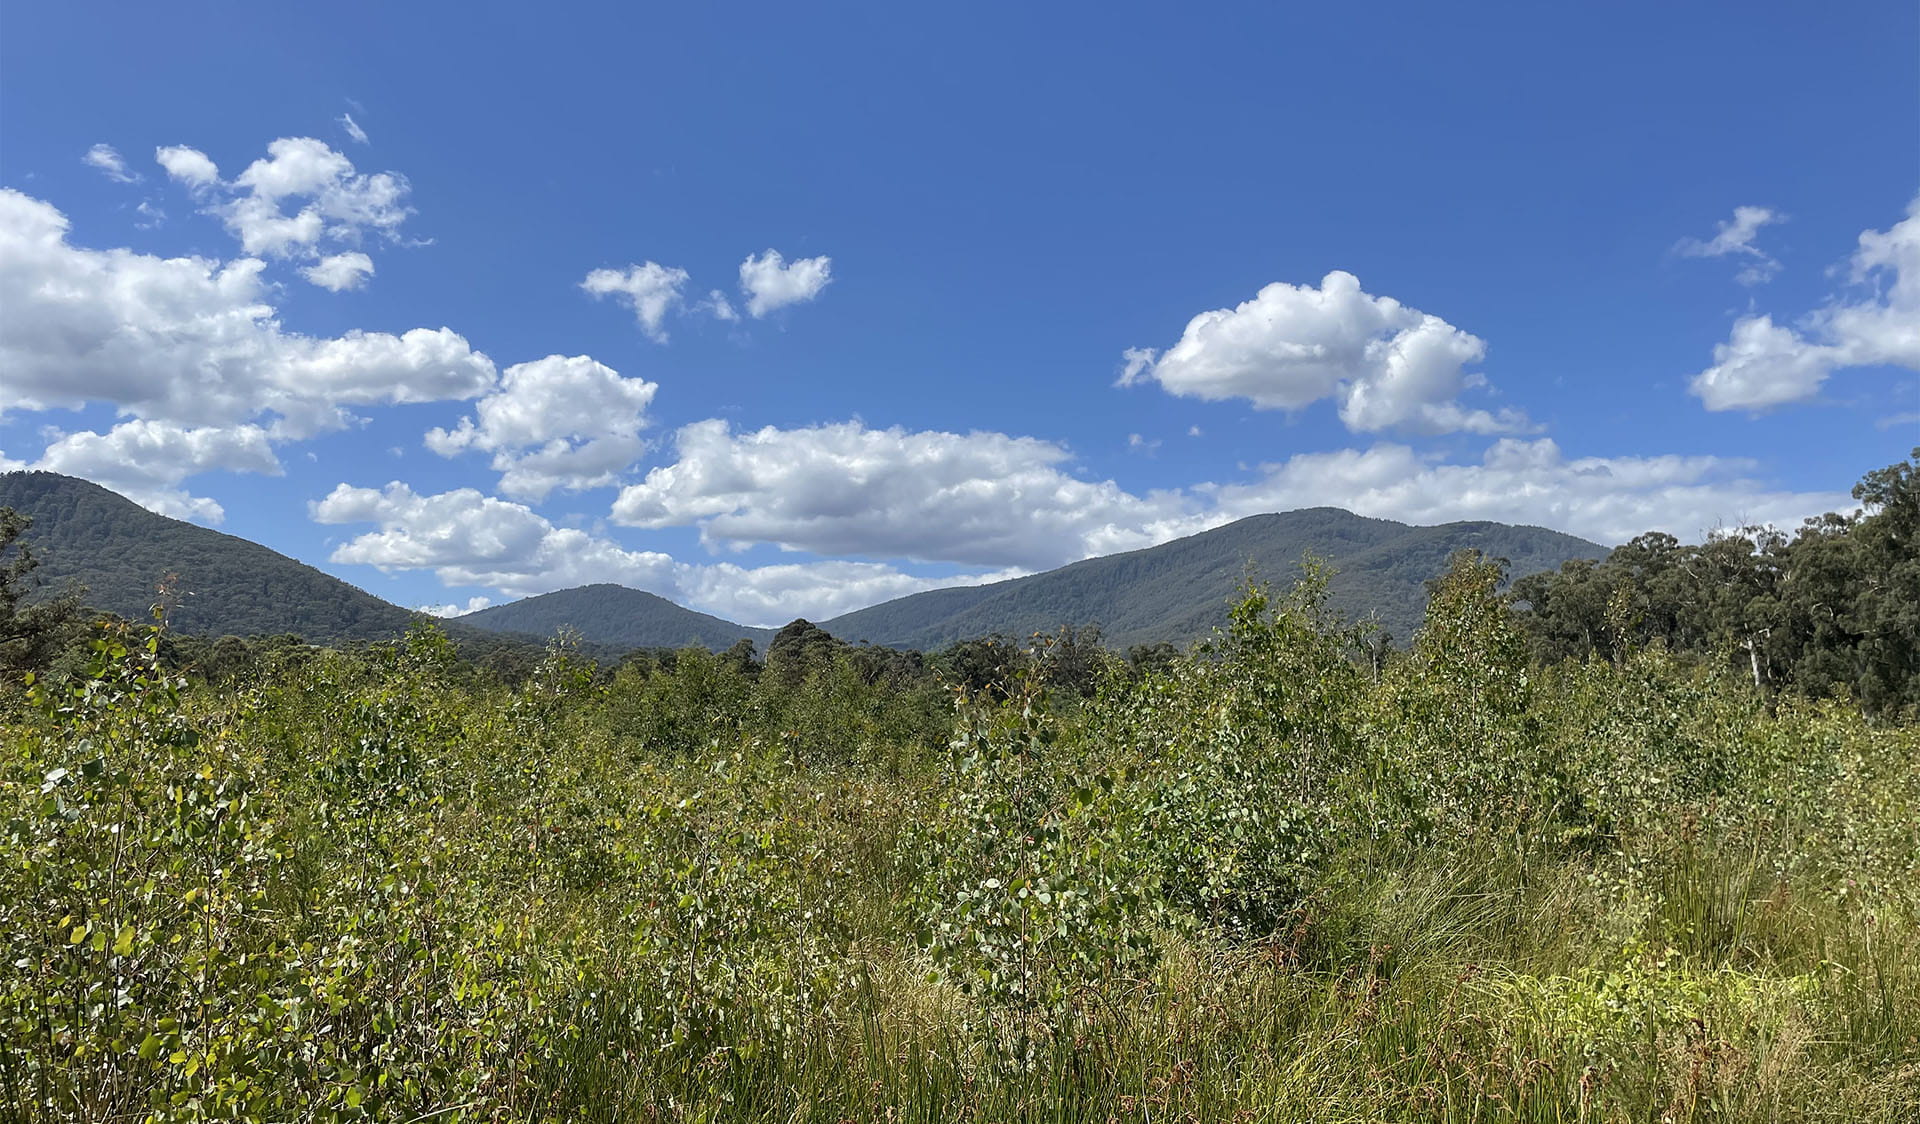 Shrubs and grasses in the foreground, with clouds and mountains in the distance